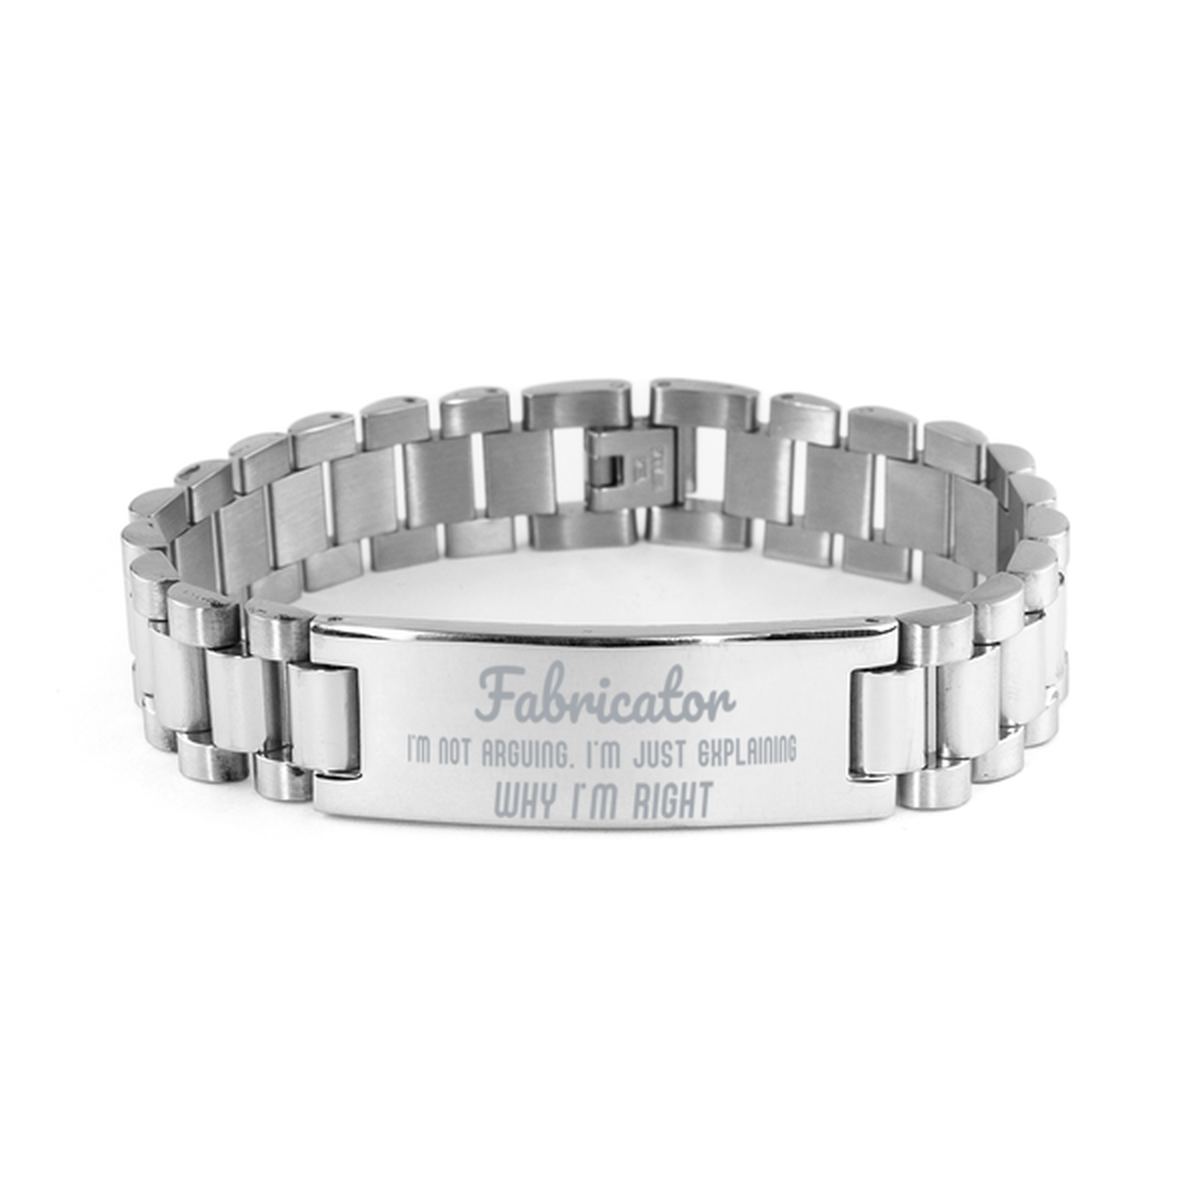 Fabricator I'm not Arguing. I'm Just Explaining Why I'm RIGHT Ladder Stainless Steel Bracelet, Graduation Birthday Christmas Fabricator Gifts For Fabricator Funny Saying Quote Present for Men Women Coworker